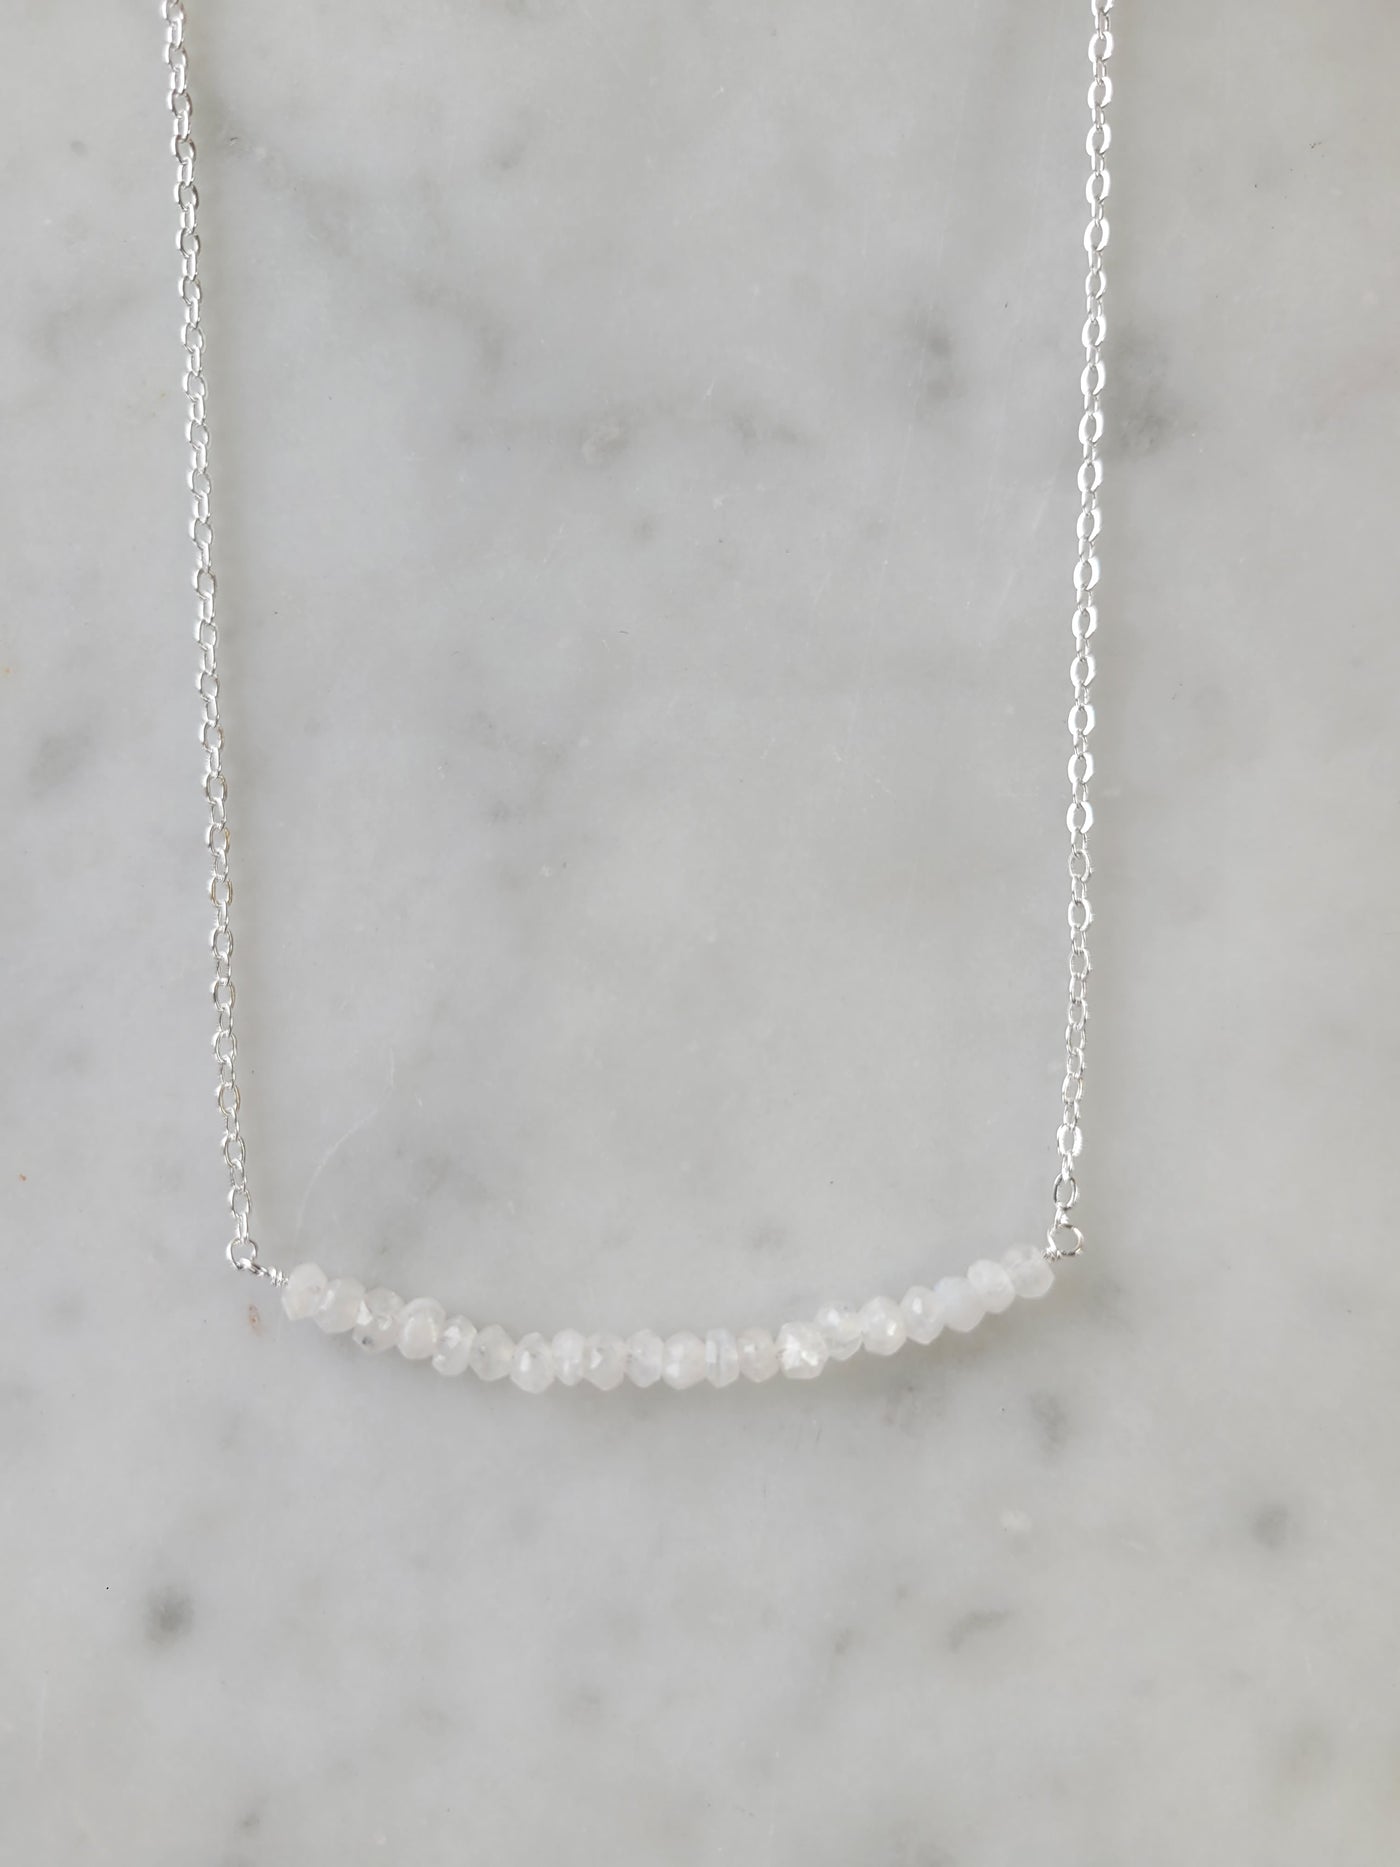 Michelle Bar Necklace in Moonstone